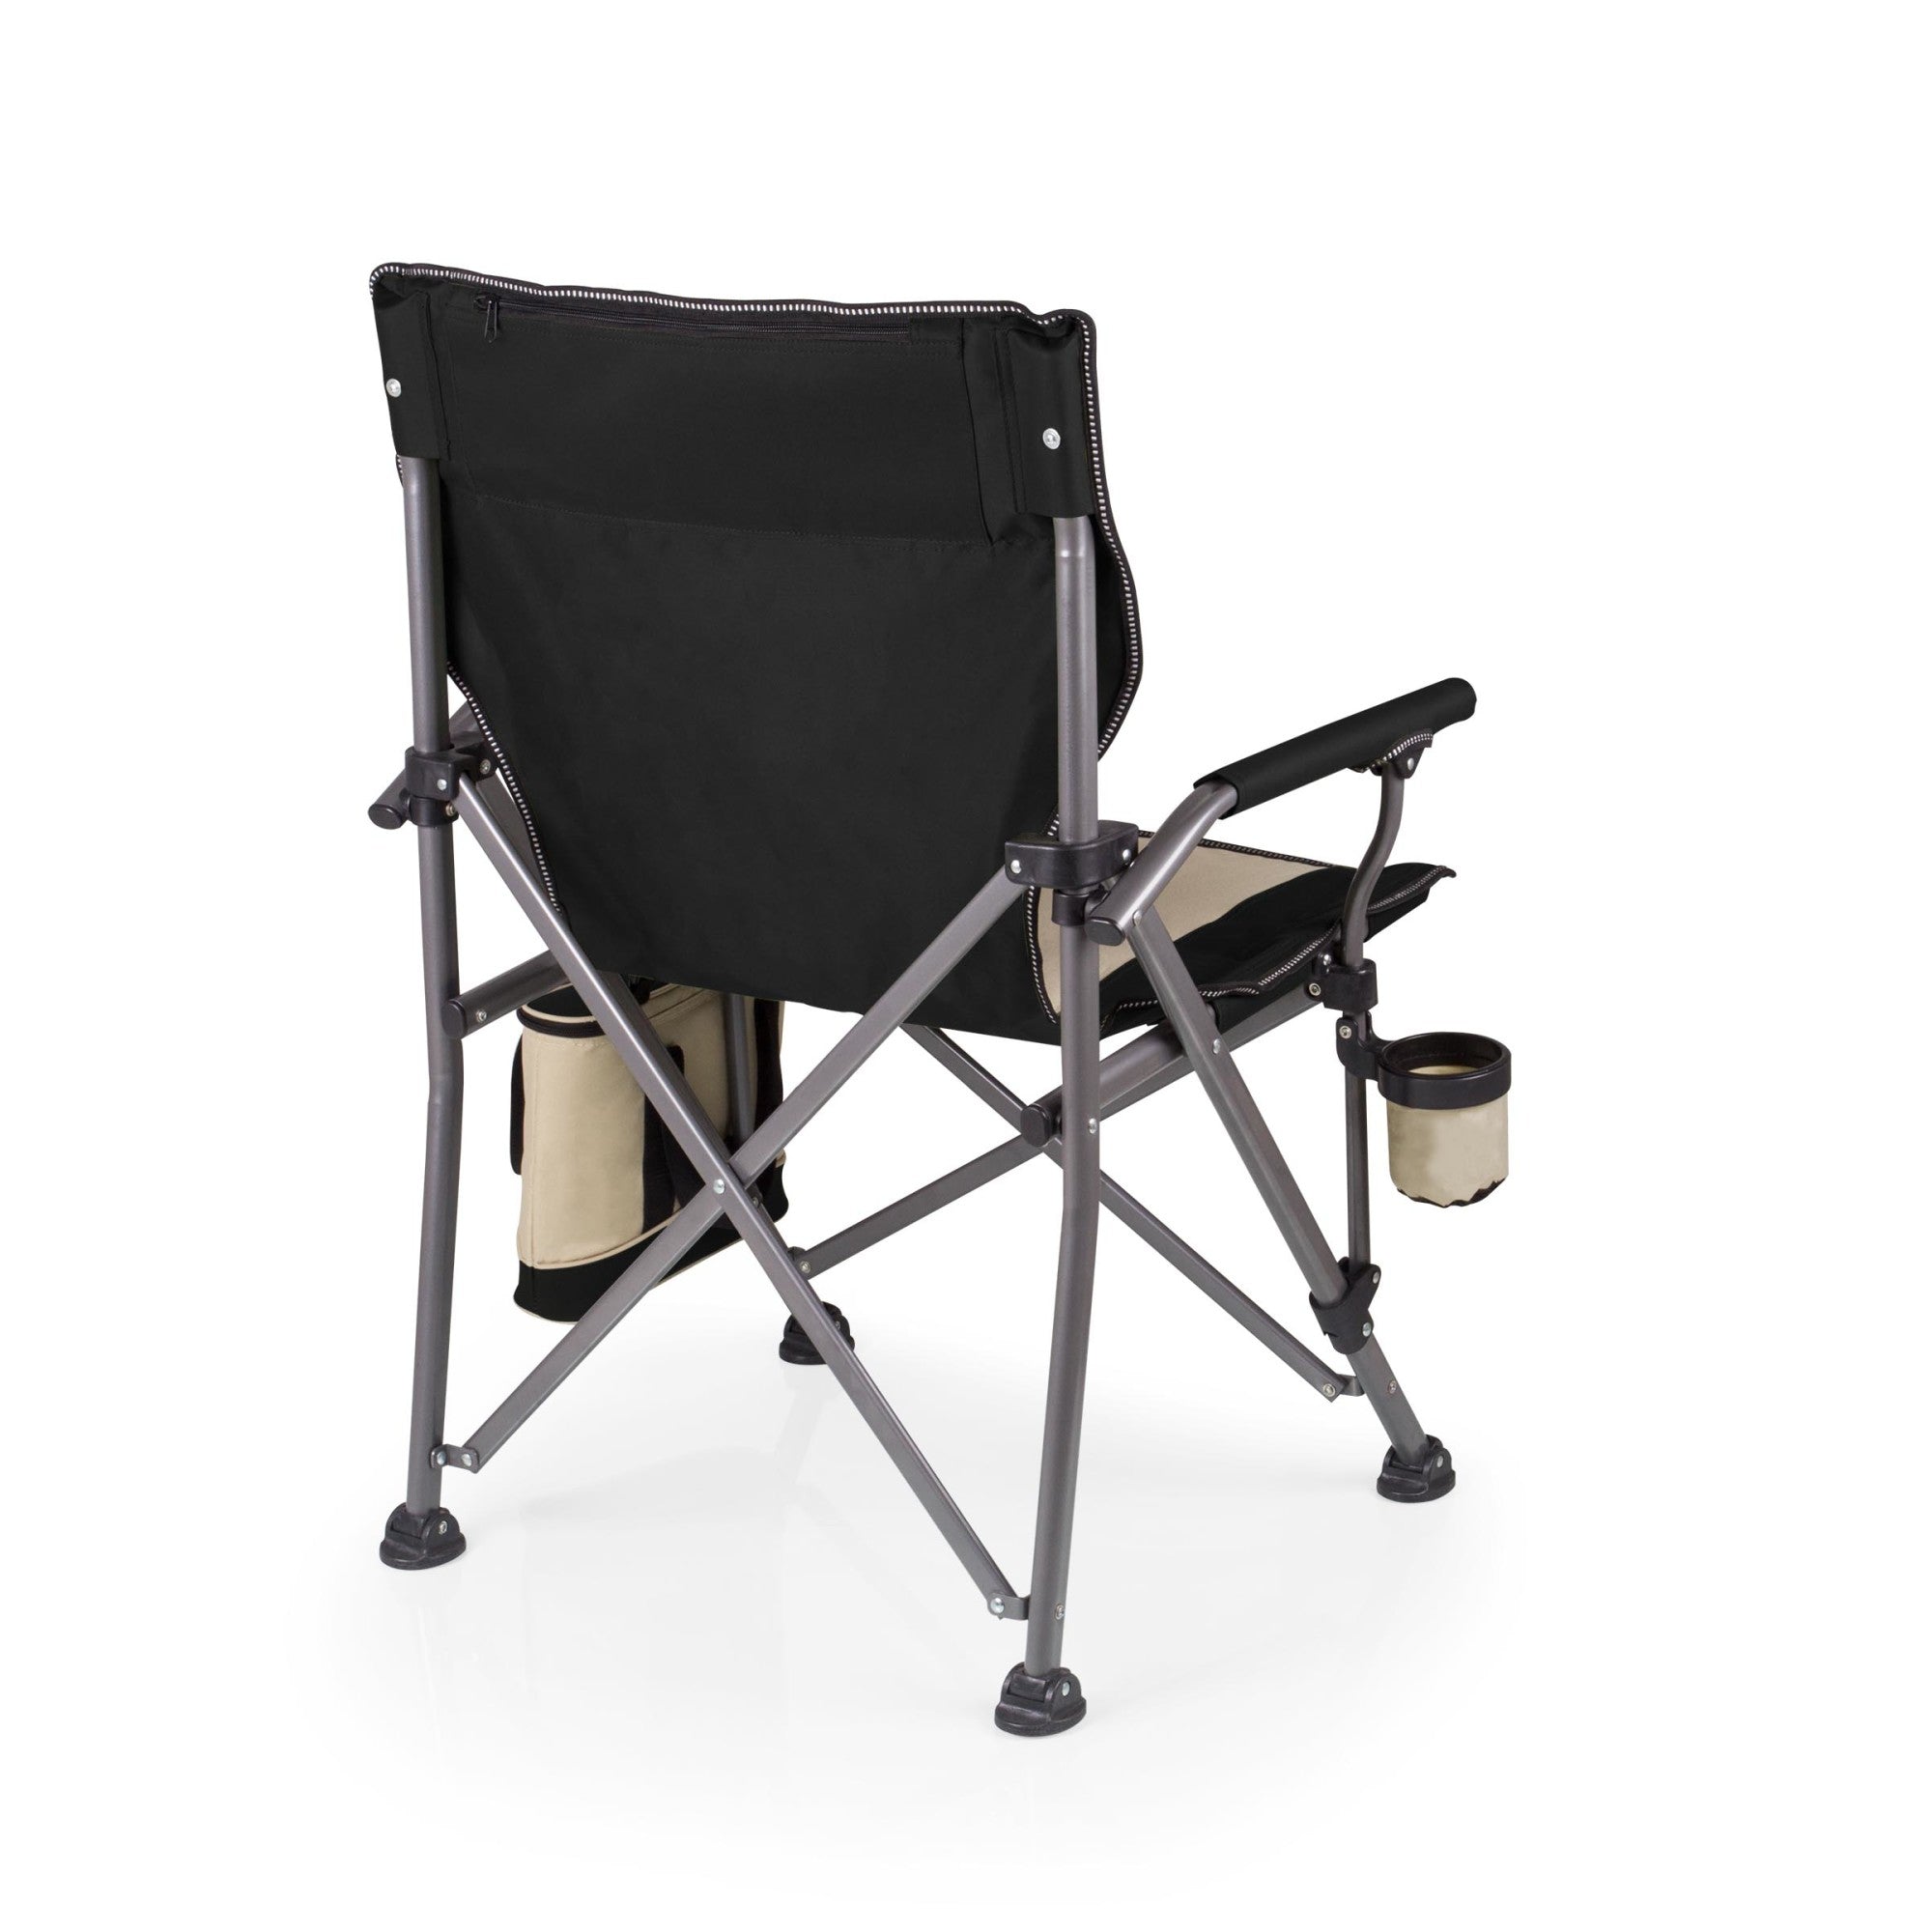 Pittsburgh Steelers - Outlander XL Camping Chair with Cooler